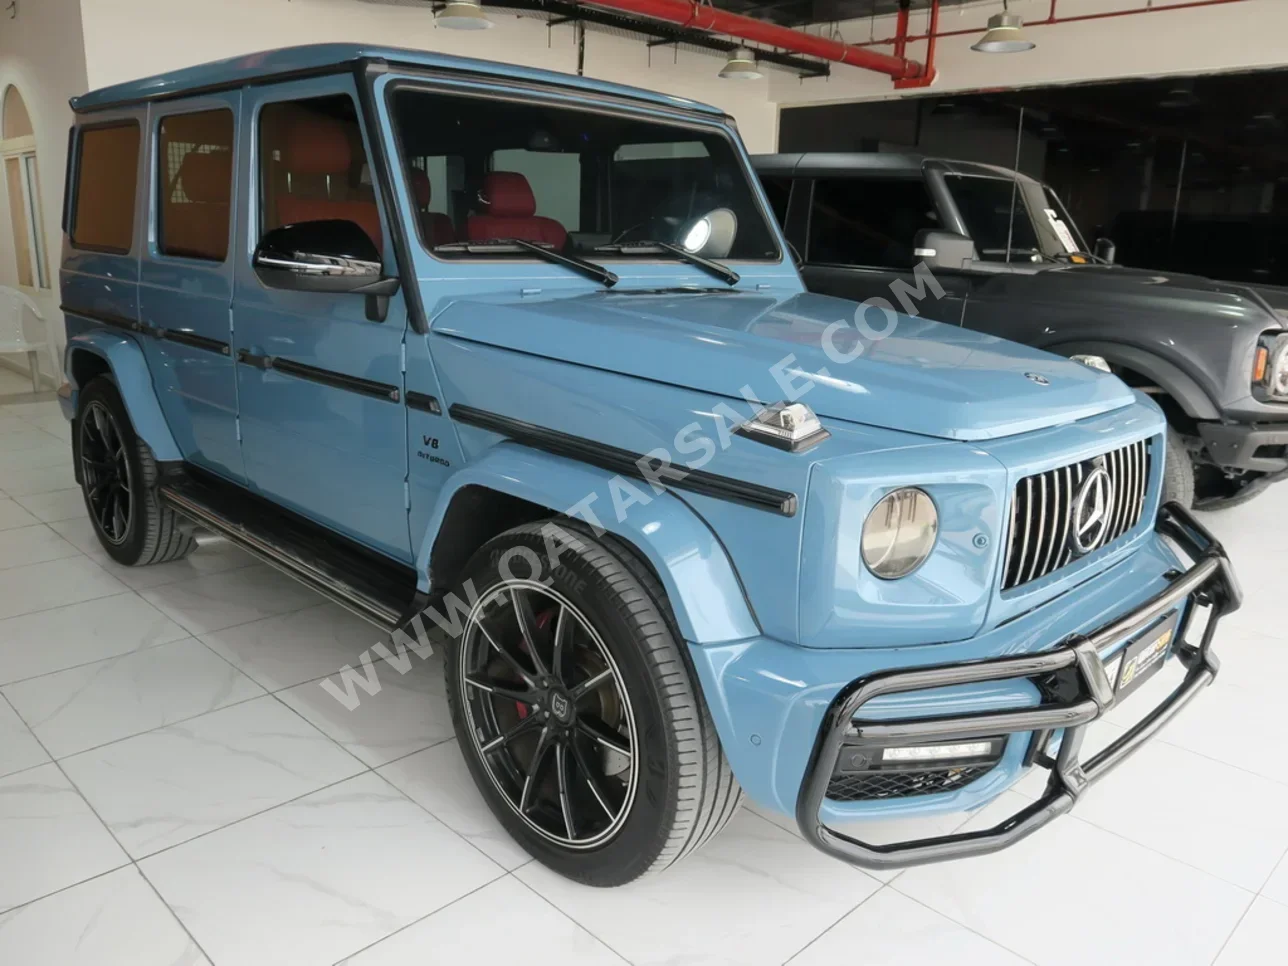 Mercedes-Benz  G-Class  63 AMG  2015  Automatic  142,000 Km  8 Cylinder  Four Wheel Drive (4WD)  SUV  Blue